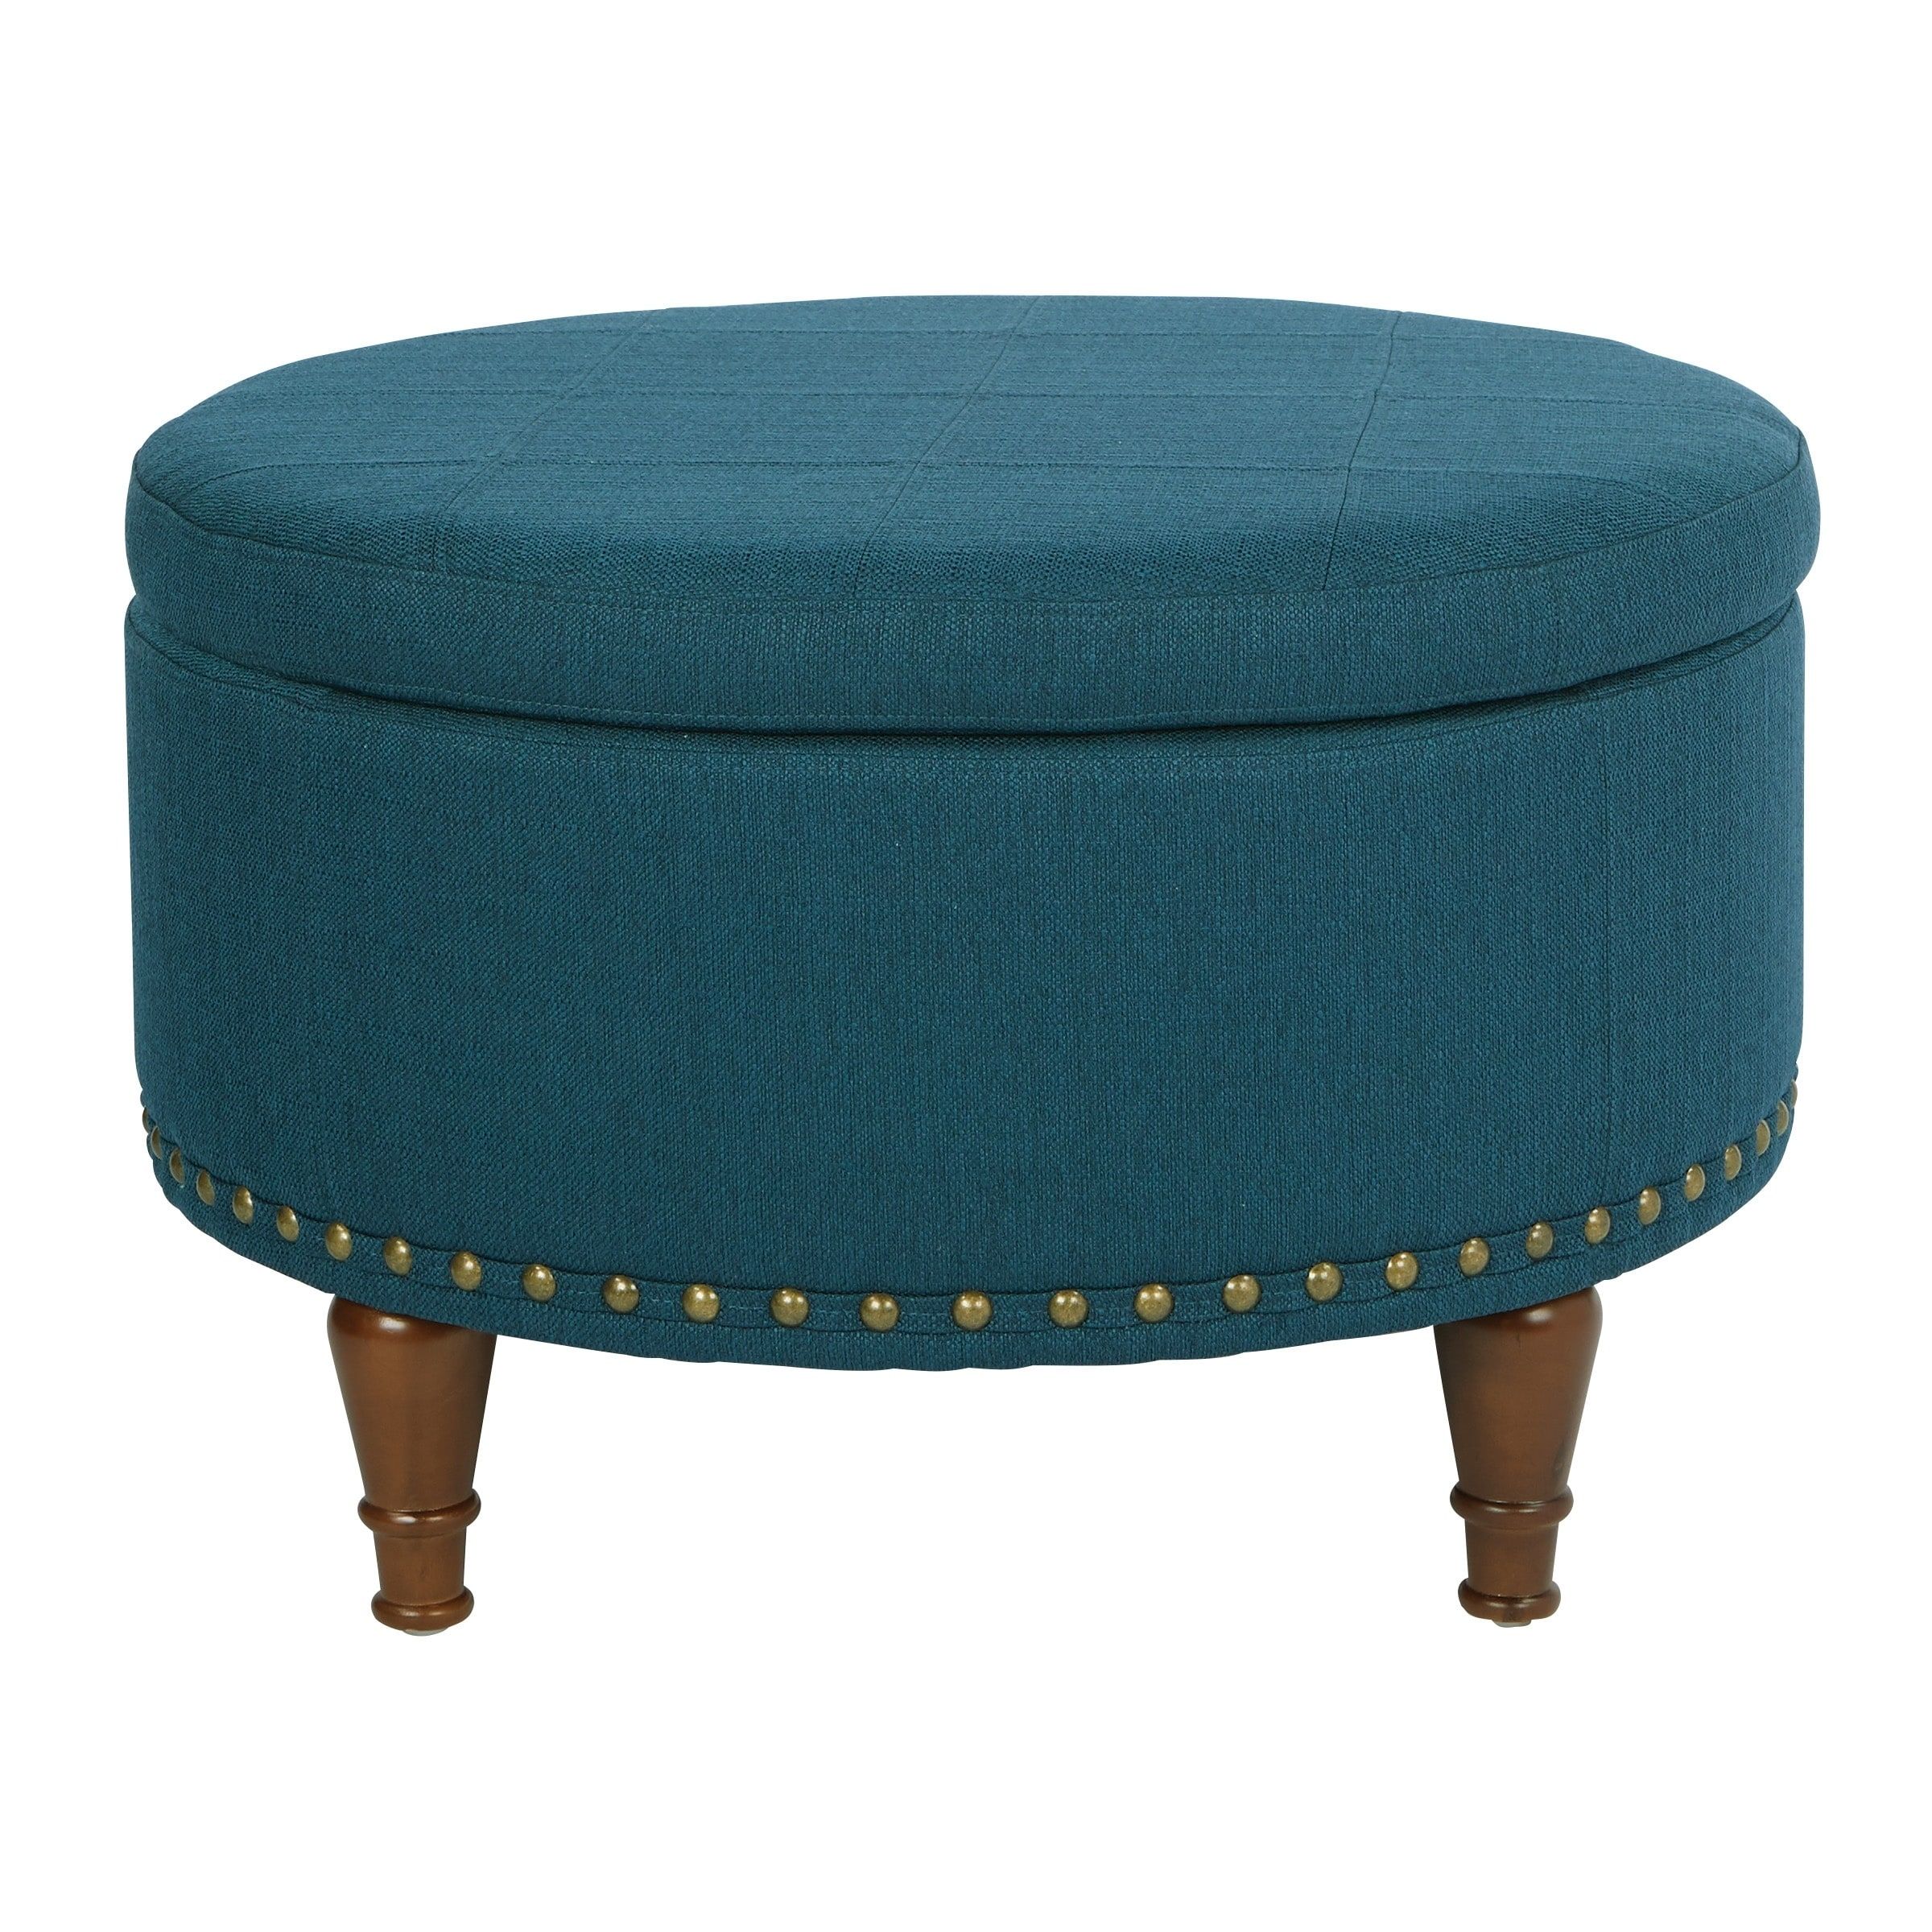 Fabric Alloway Storage Ottoman With Bronze Nailheads Medium | Ebay Within Caramel Leather And Bronze Steel Tufted Square Ottomans (View 11 of 20)